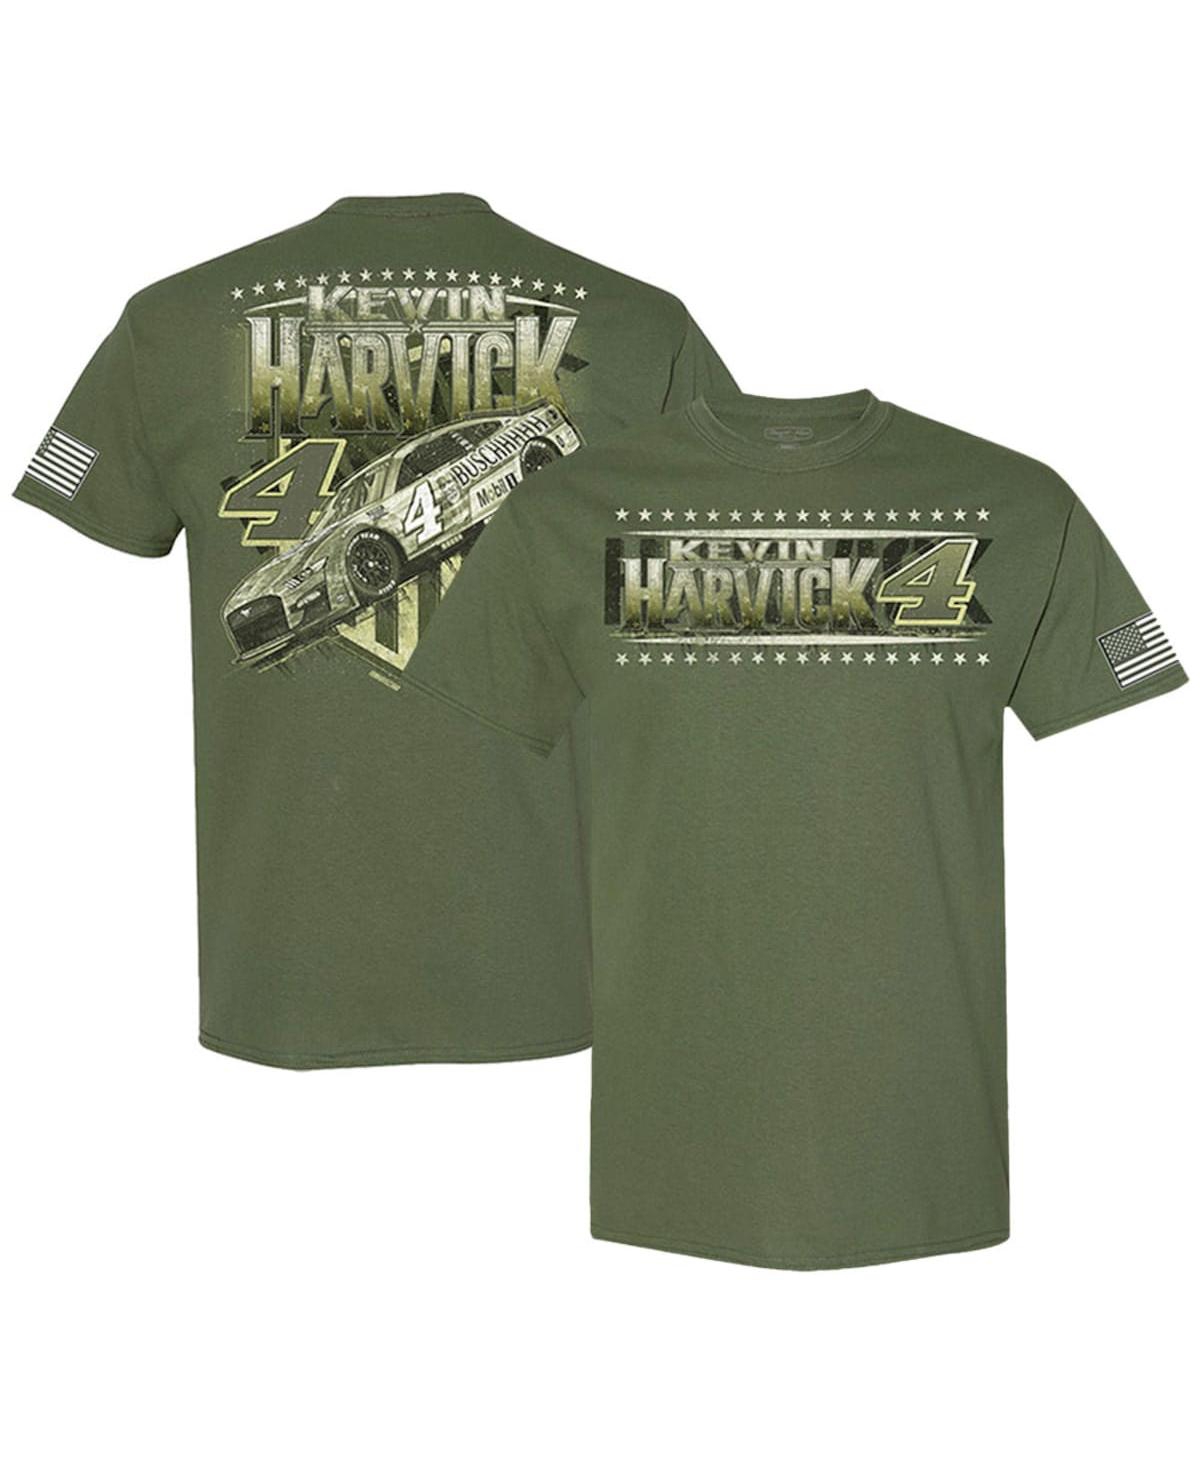 Men's Stewart-Haas Racing Team Collection Olive Kevin Harvick Busch Light Military-Inspired T-shirt - Olive